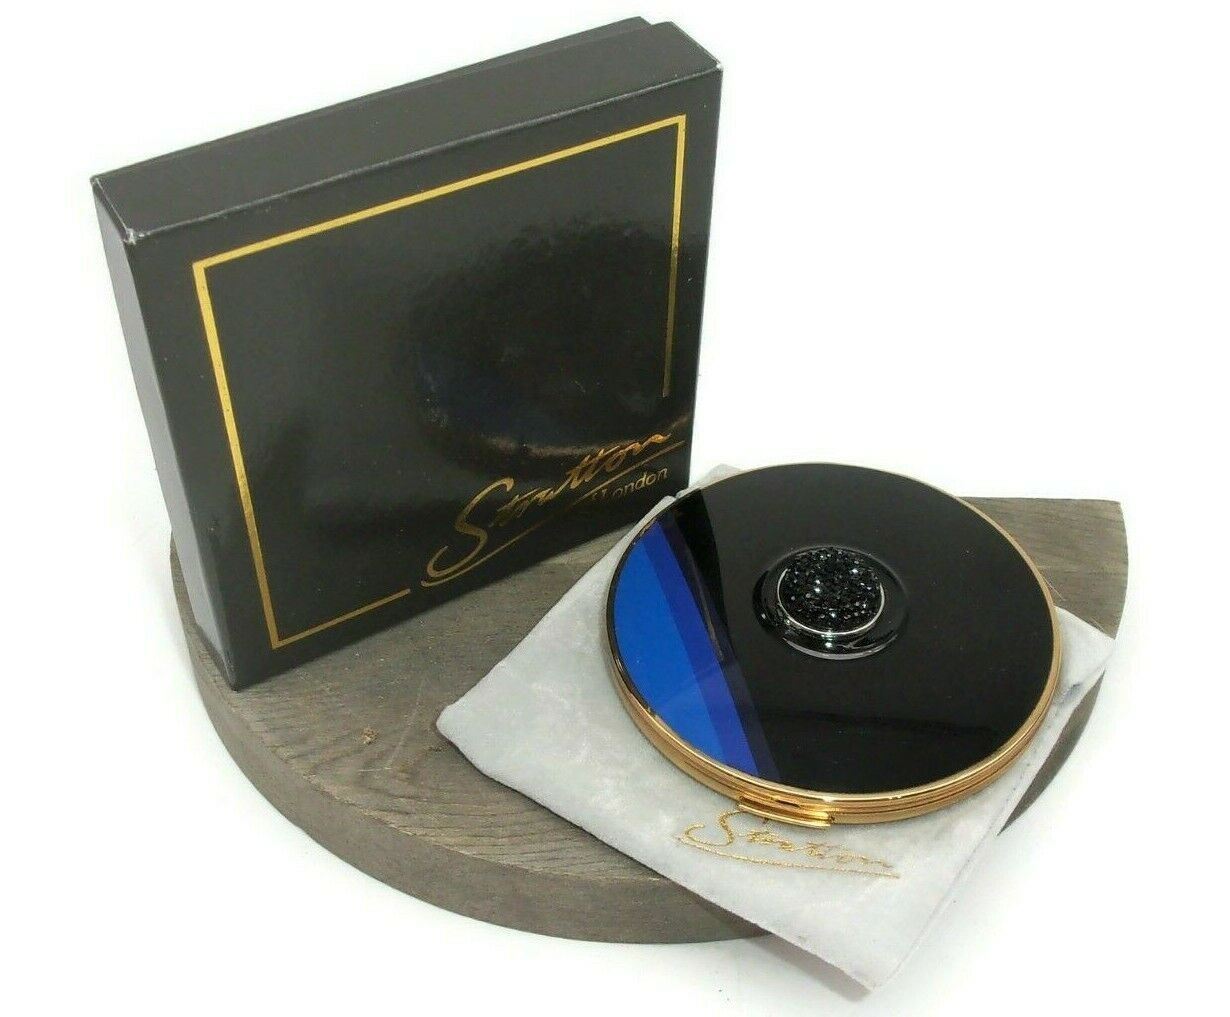 Unused Stratton Black And Blue Compact Convertible, Jeweled Black Center, Nos